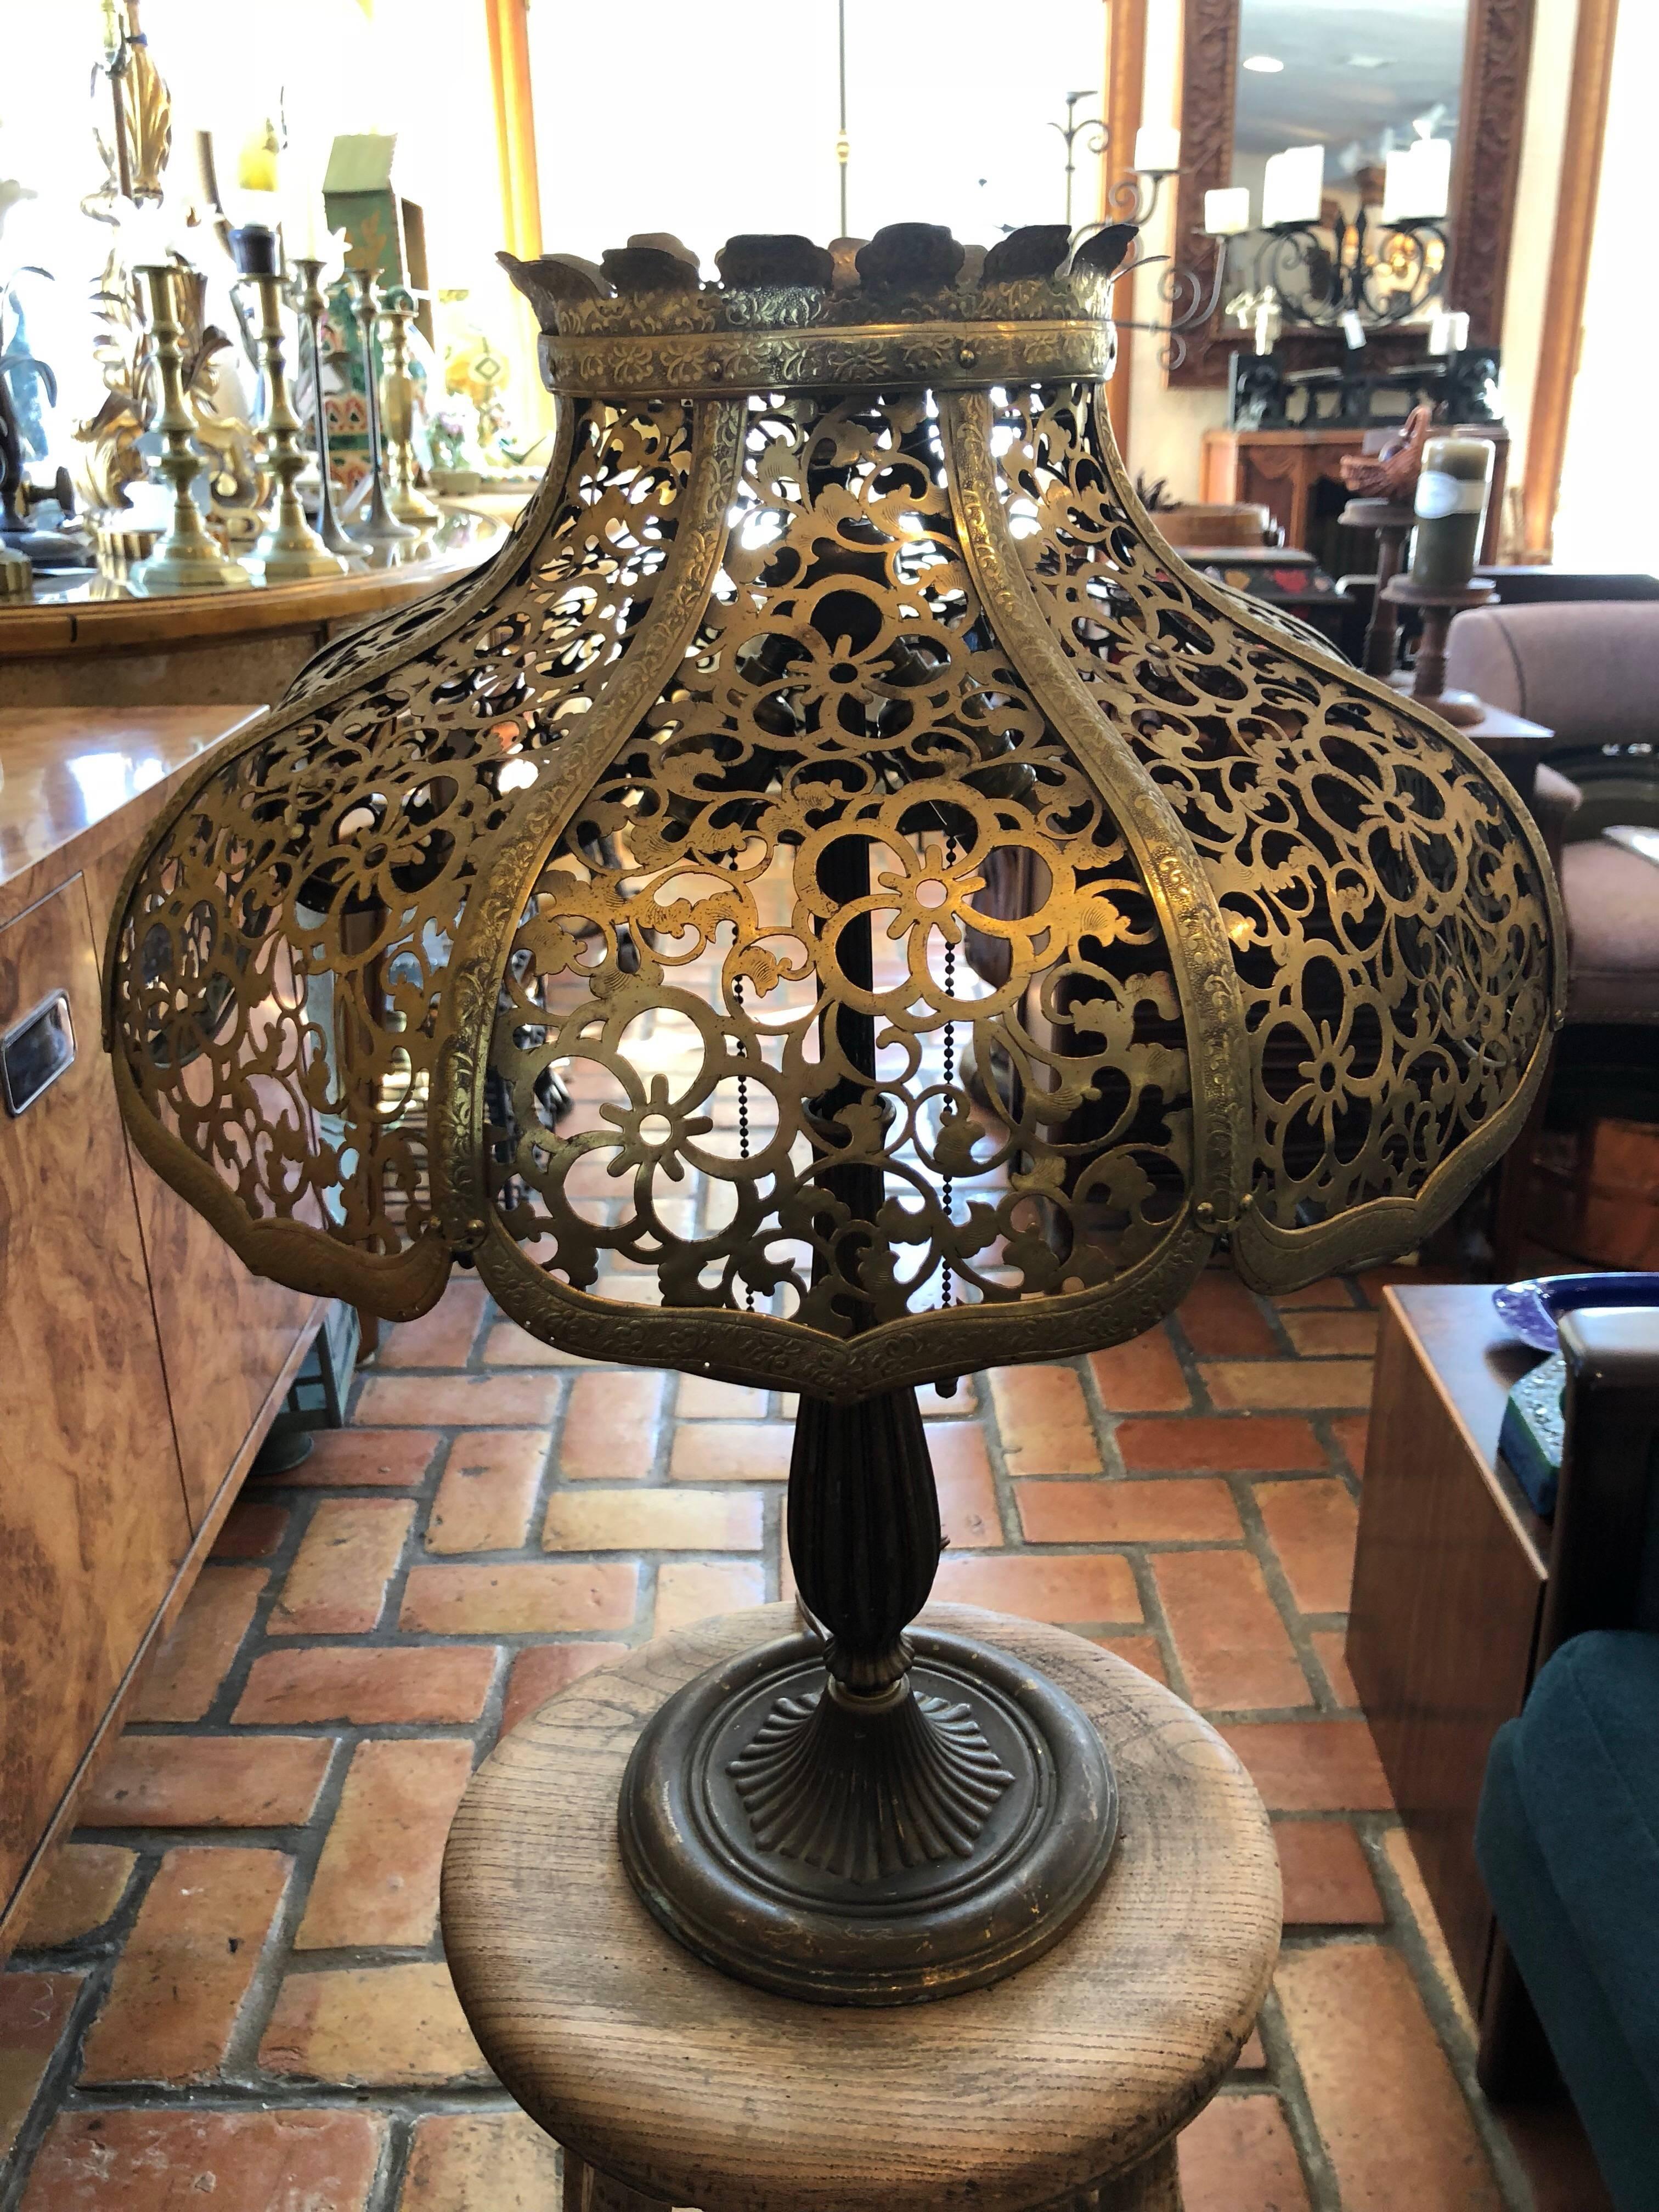 American Antique Gilt Lamp with Pierced Brass Shade by Miller